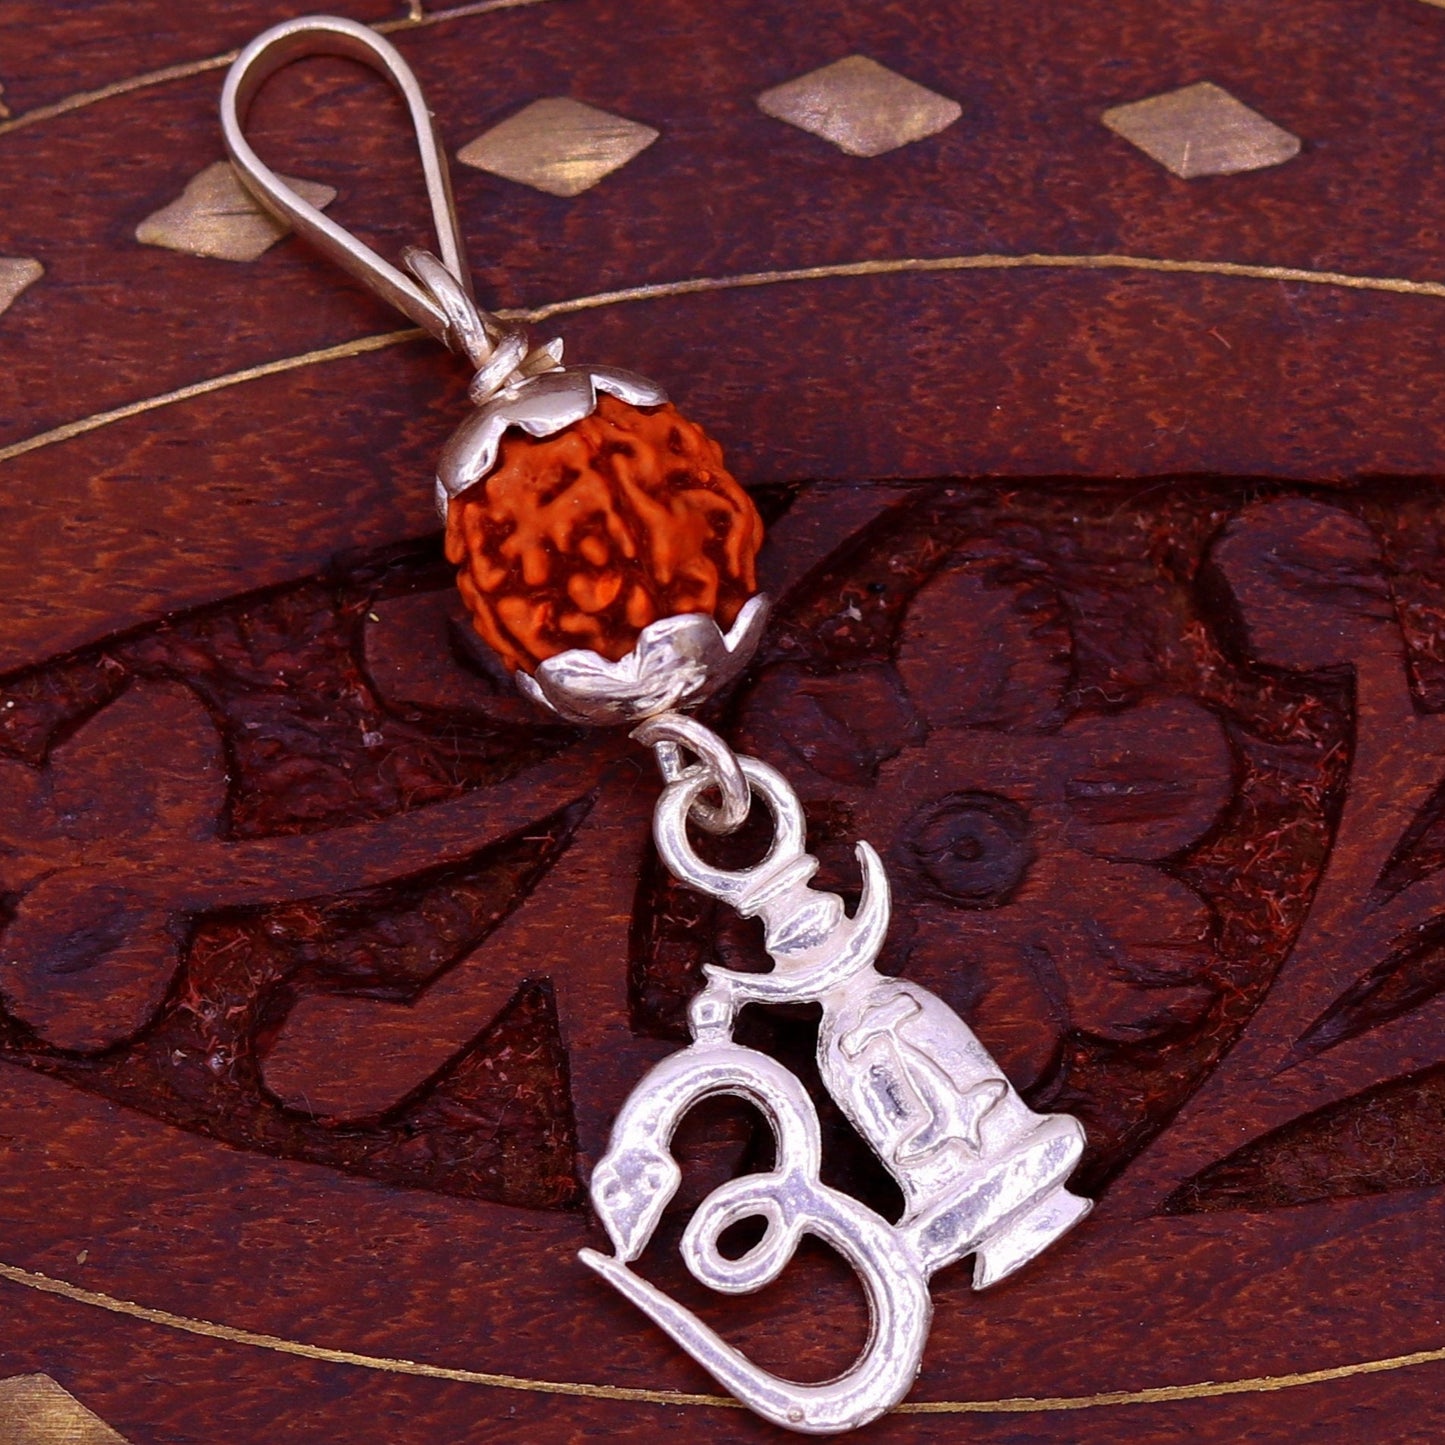 Amazing Sterling silver Aum mantra pendant with fabulous natural rudraksha beads excellent unisex gifting light weight jewelry nsp280 - TRIBAL ORNAMENTS